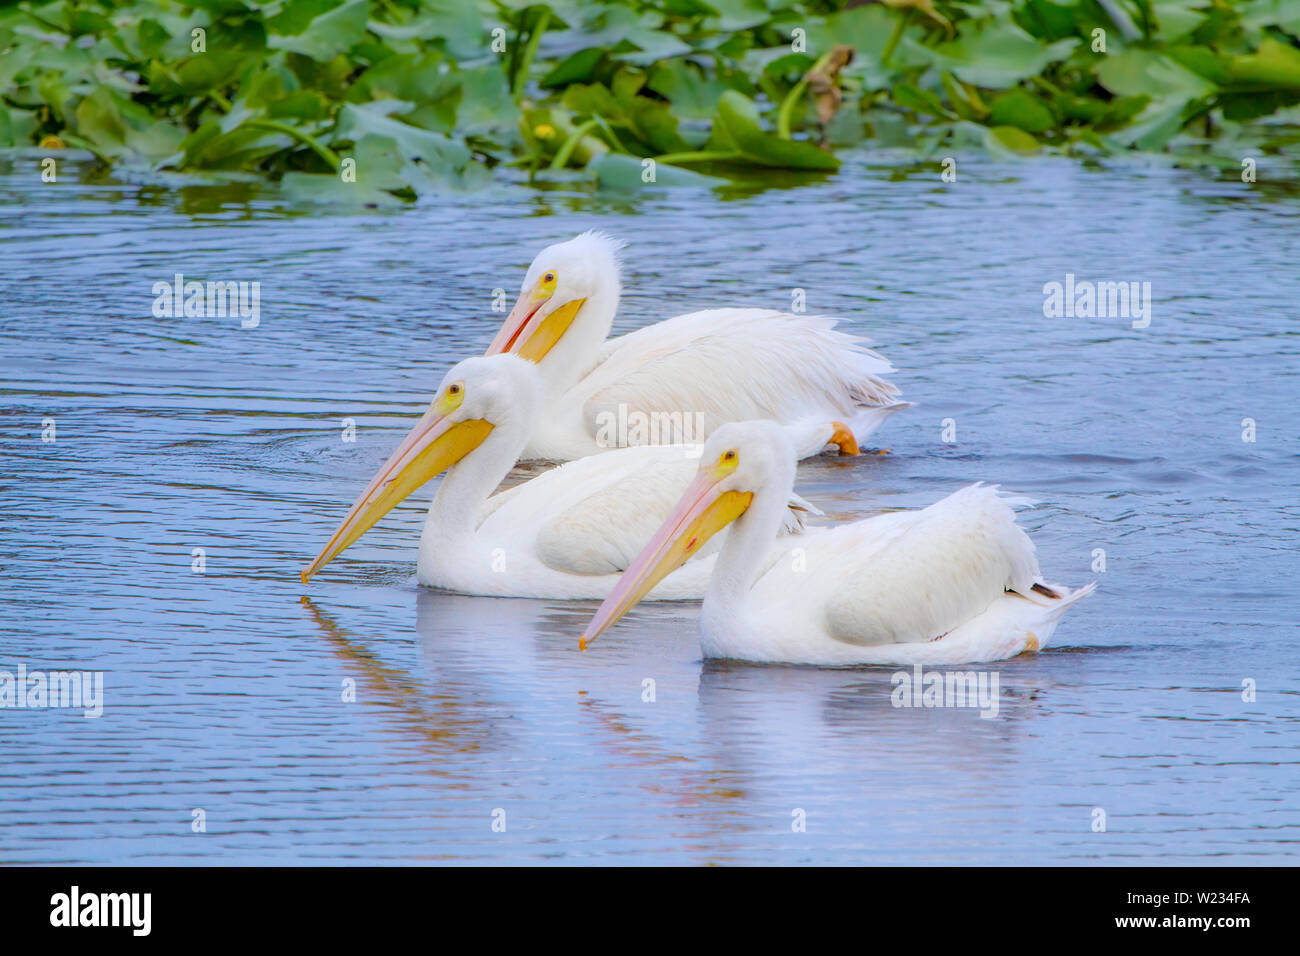 A trio of Pelicans swims along a creek in the Florida wetlands. Although mostly associated with the beach, pelicans can also be found inland. Stock Photo